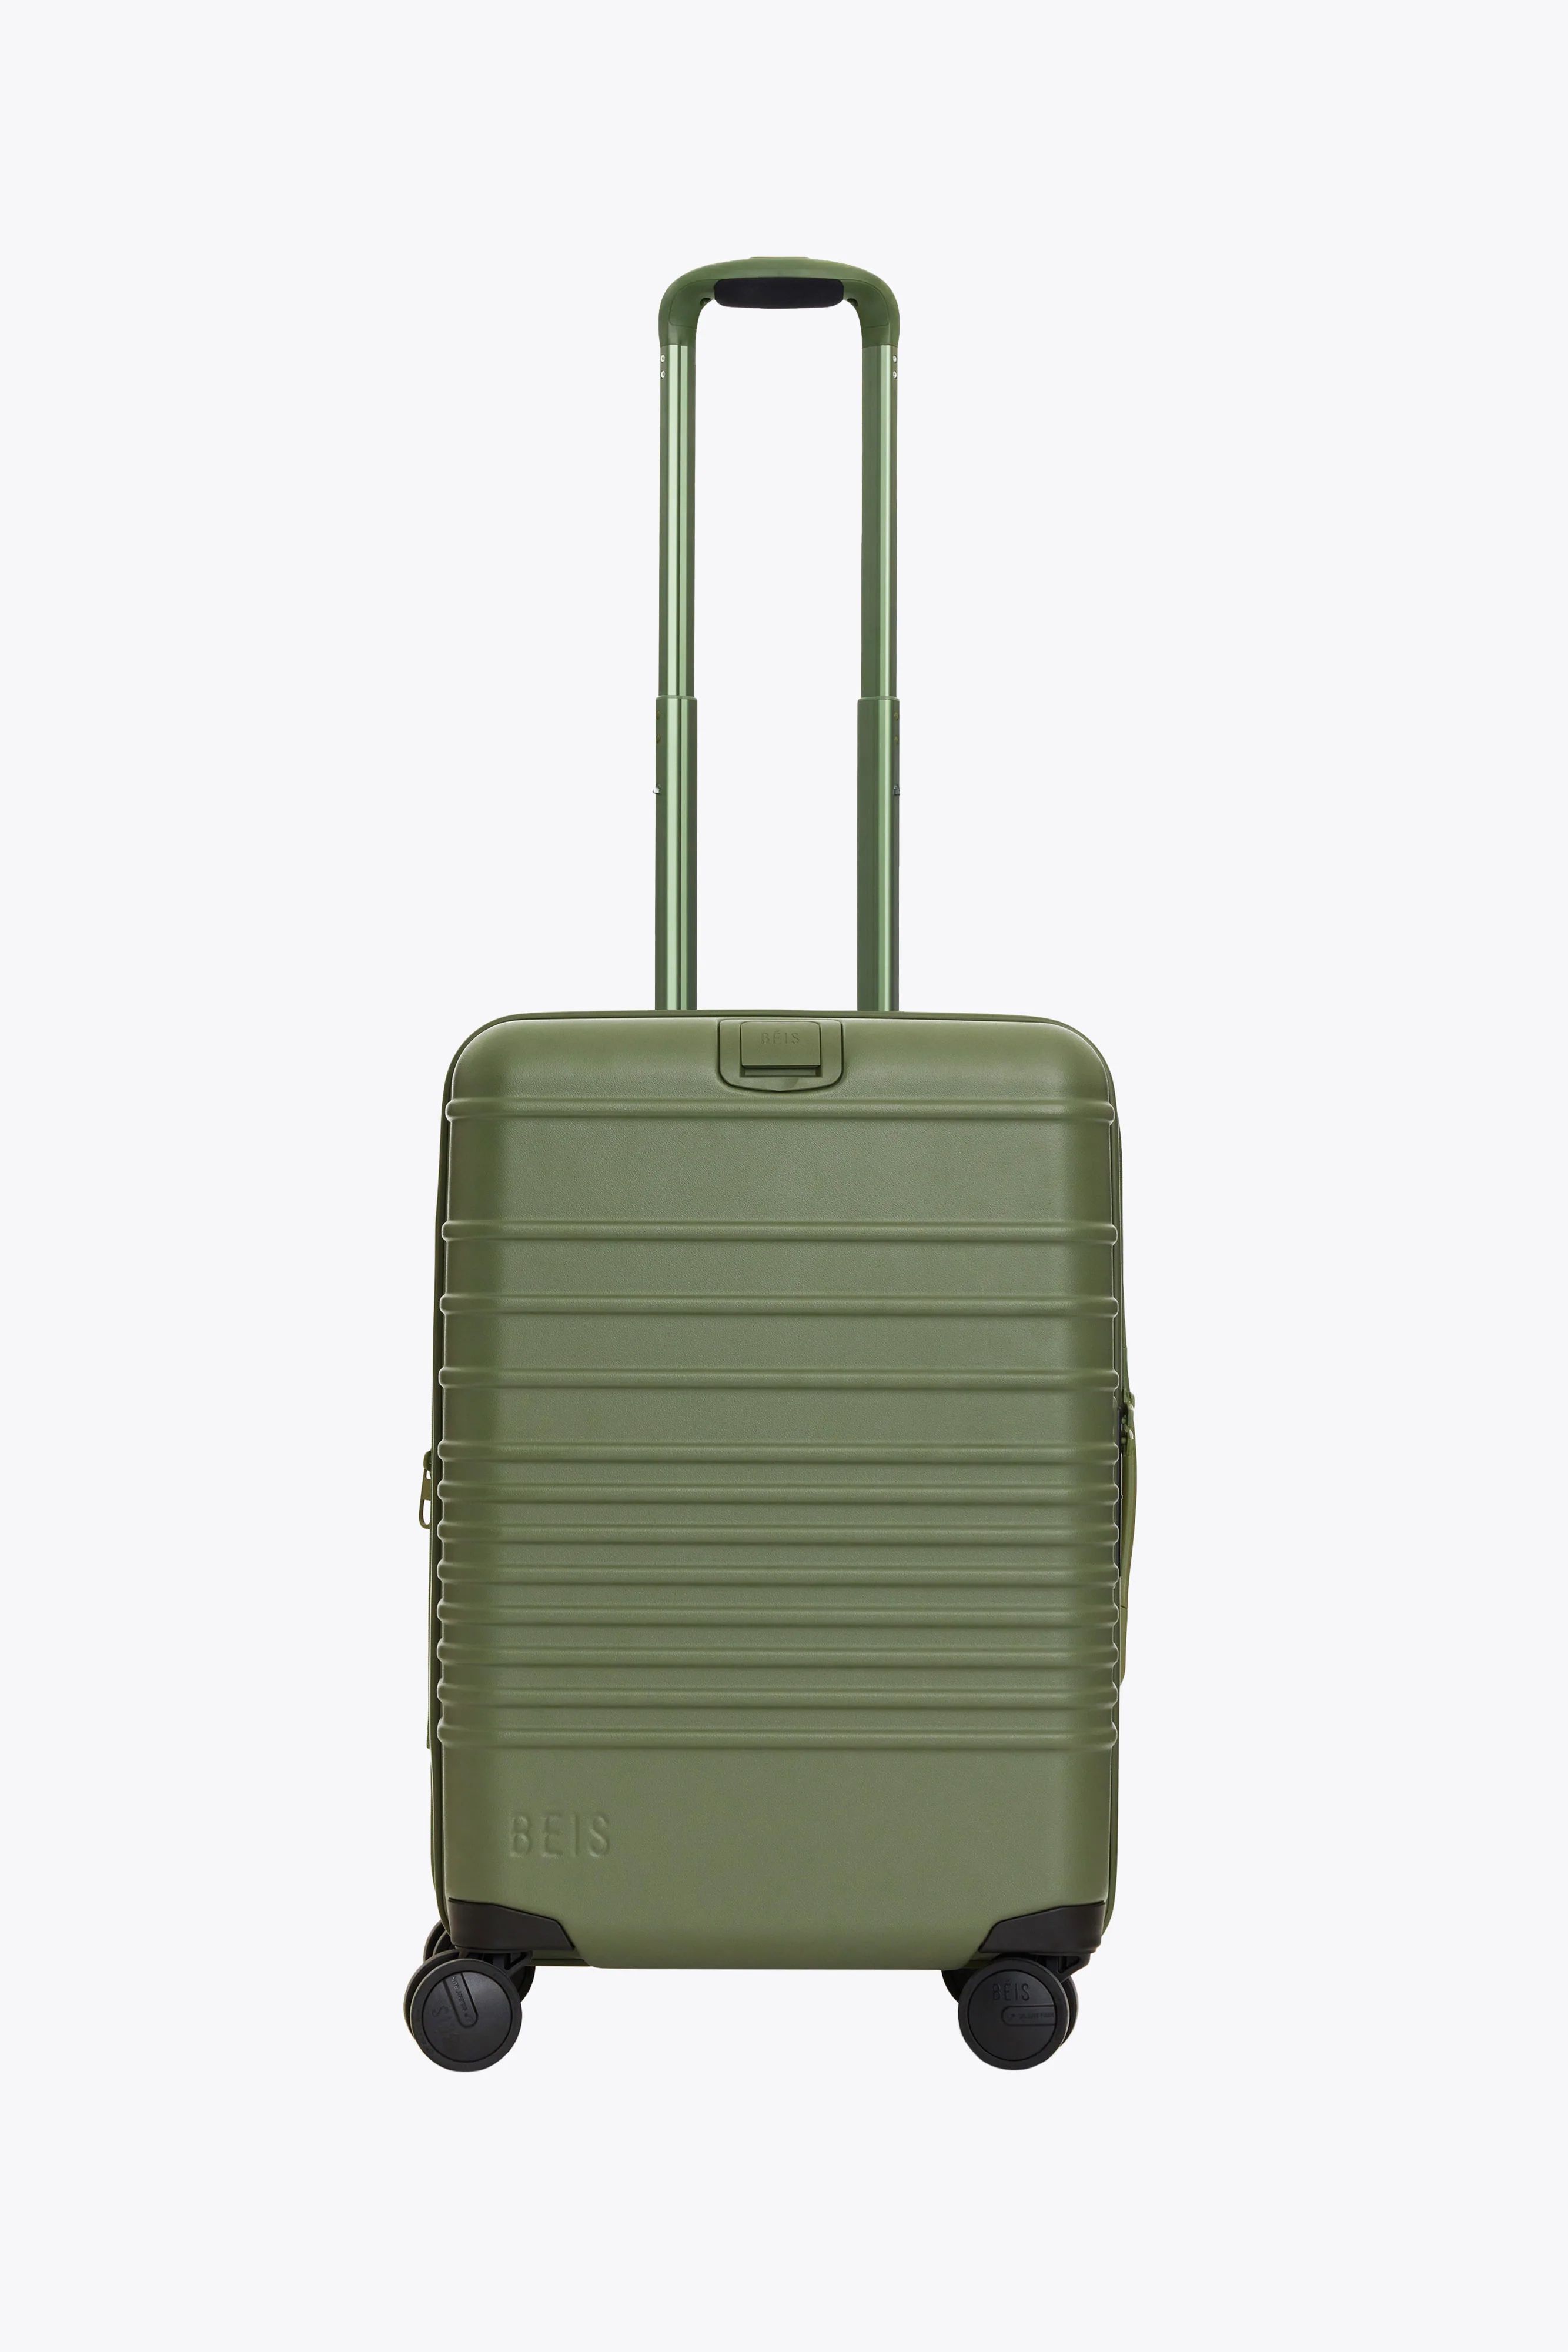 BÉIS 'The Carry-On' in Olive - Olive Green Carry-On Luggage & Suitcases | BÉIS Travel